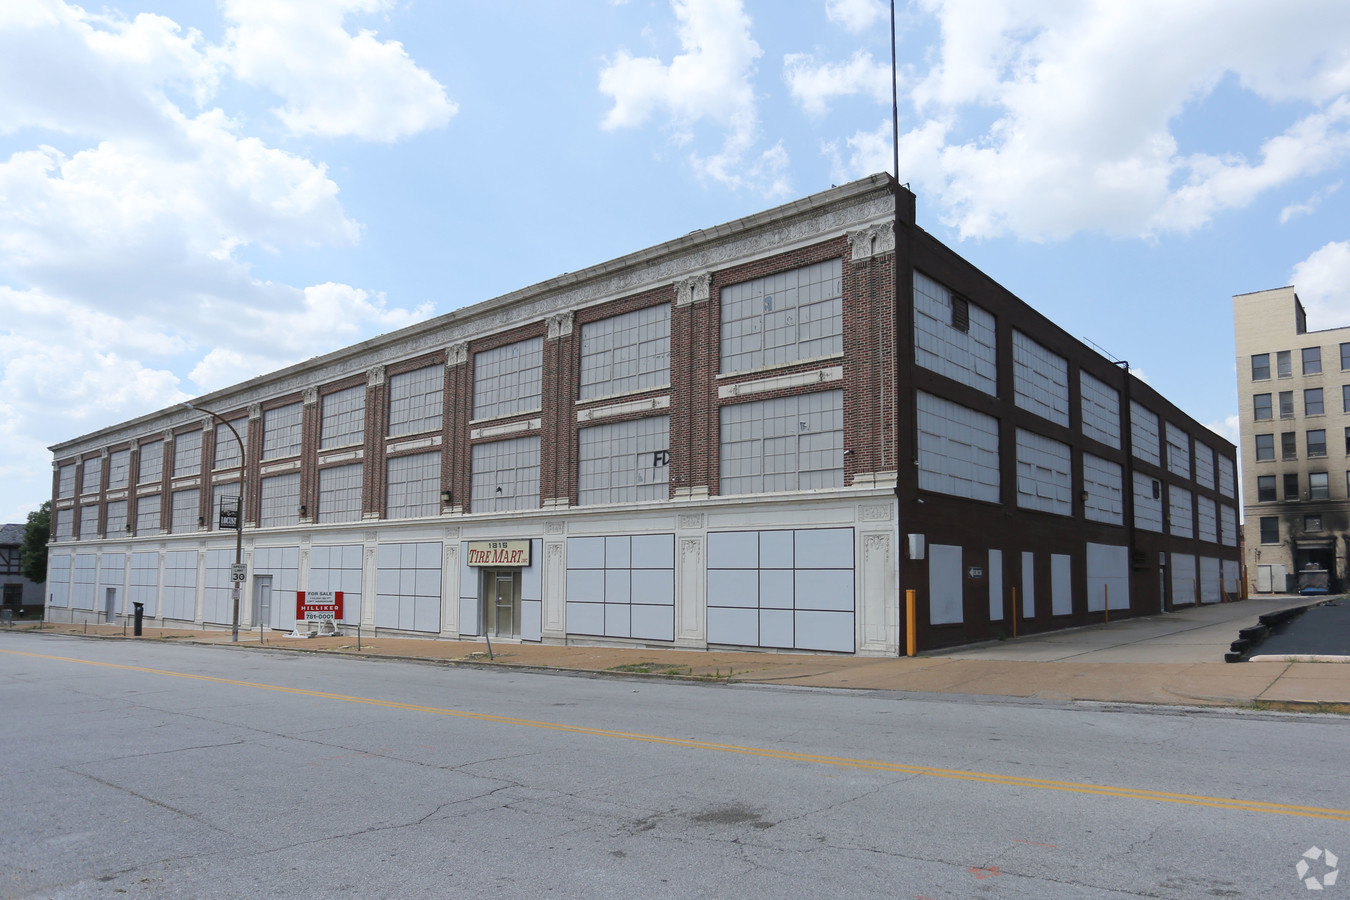 Screaming Eagle Purchases Historic St. Louis Property for Development